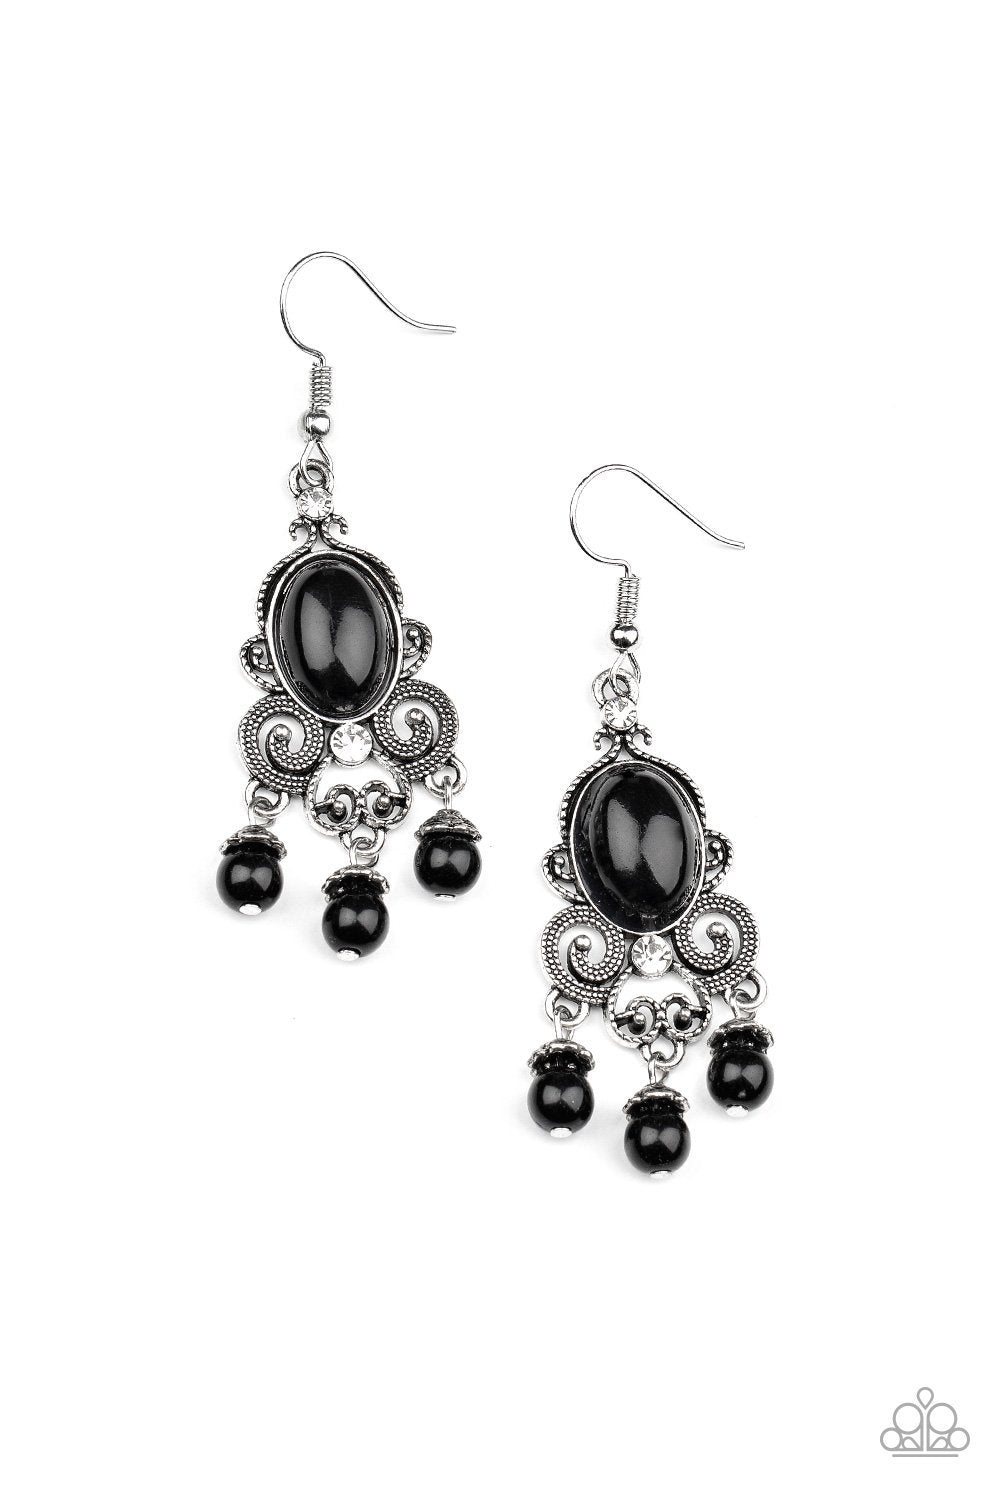 I Better Get Glowing Black Earrings - Paparazzi Accessories- lightbox - CarasShop.com - $5 Jewelry by Cara Jewels